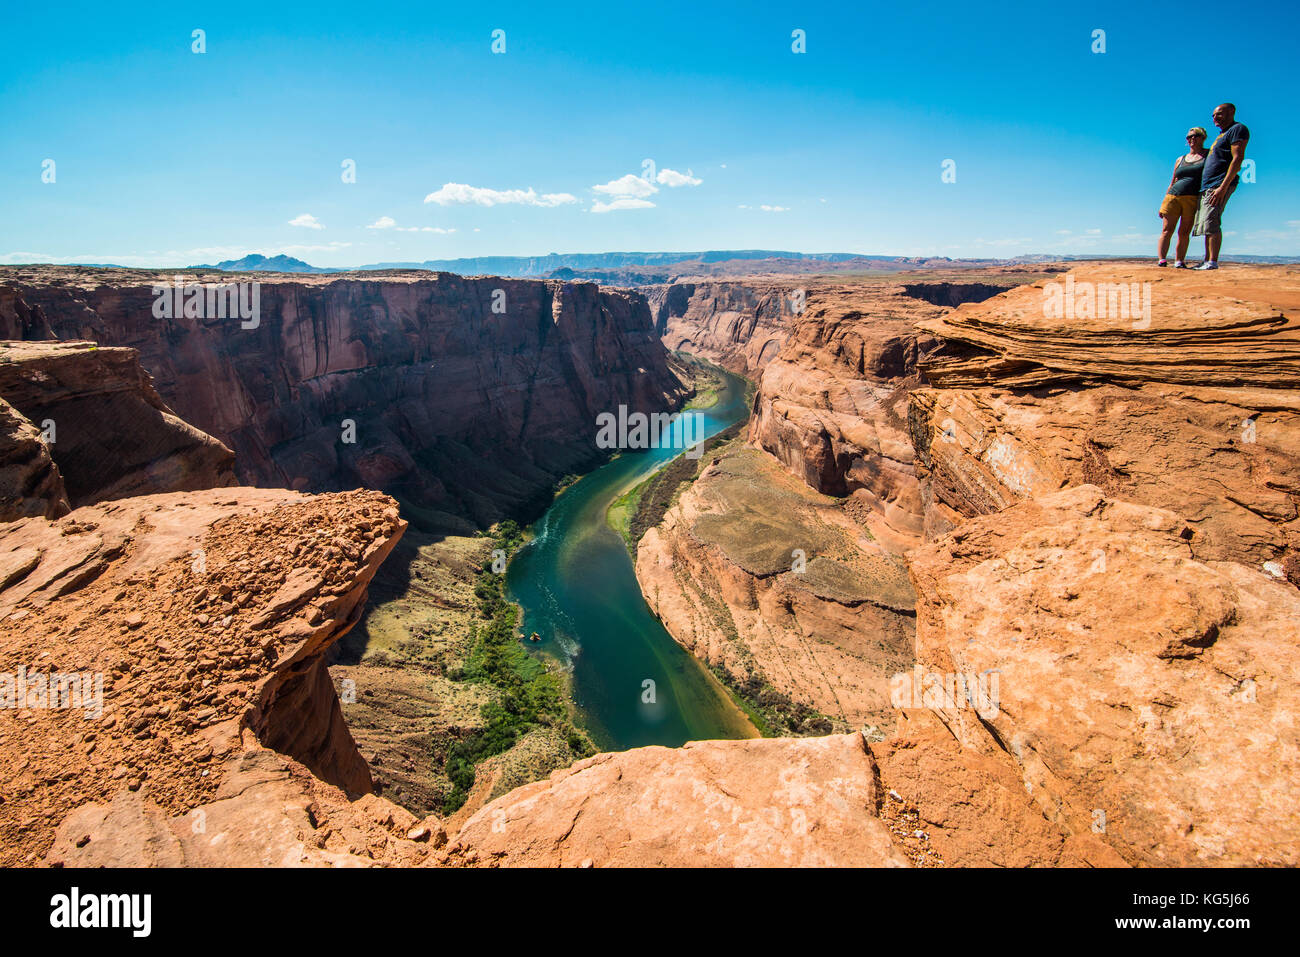 Tourists standing on top of the Horseshoe bend on the Colorado river at the south rim, Arizona, USA Stock Photo